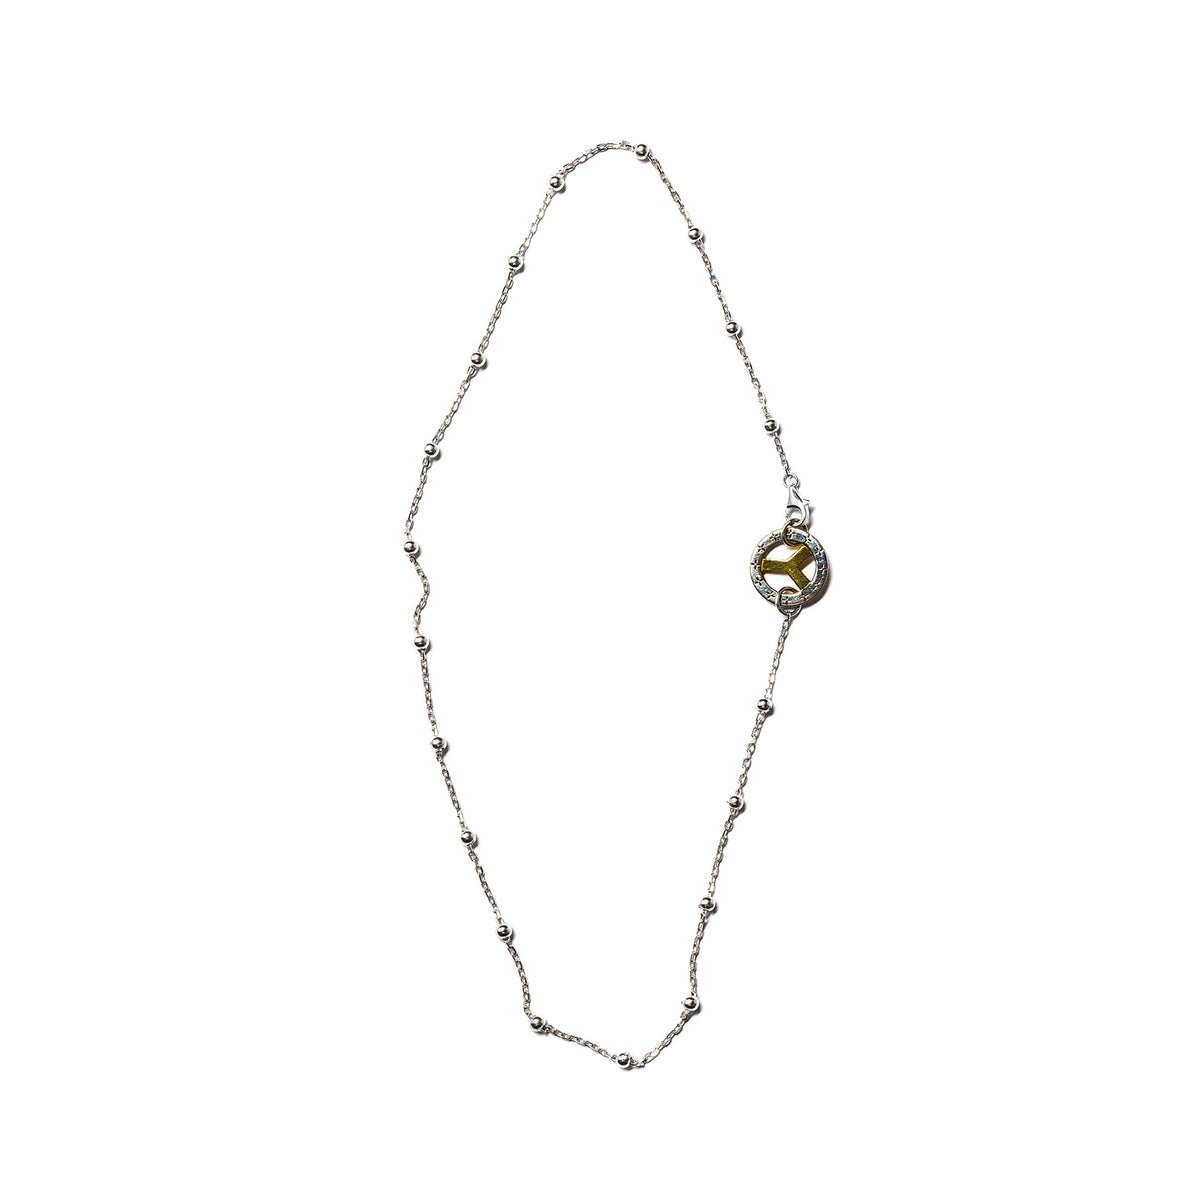 Bead Link Chain in Silver/14K